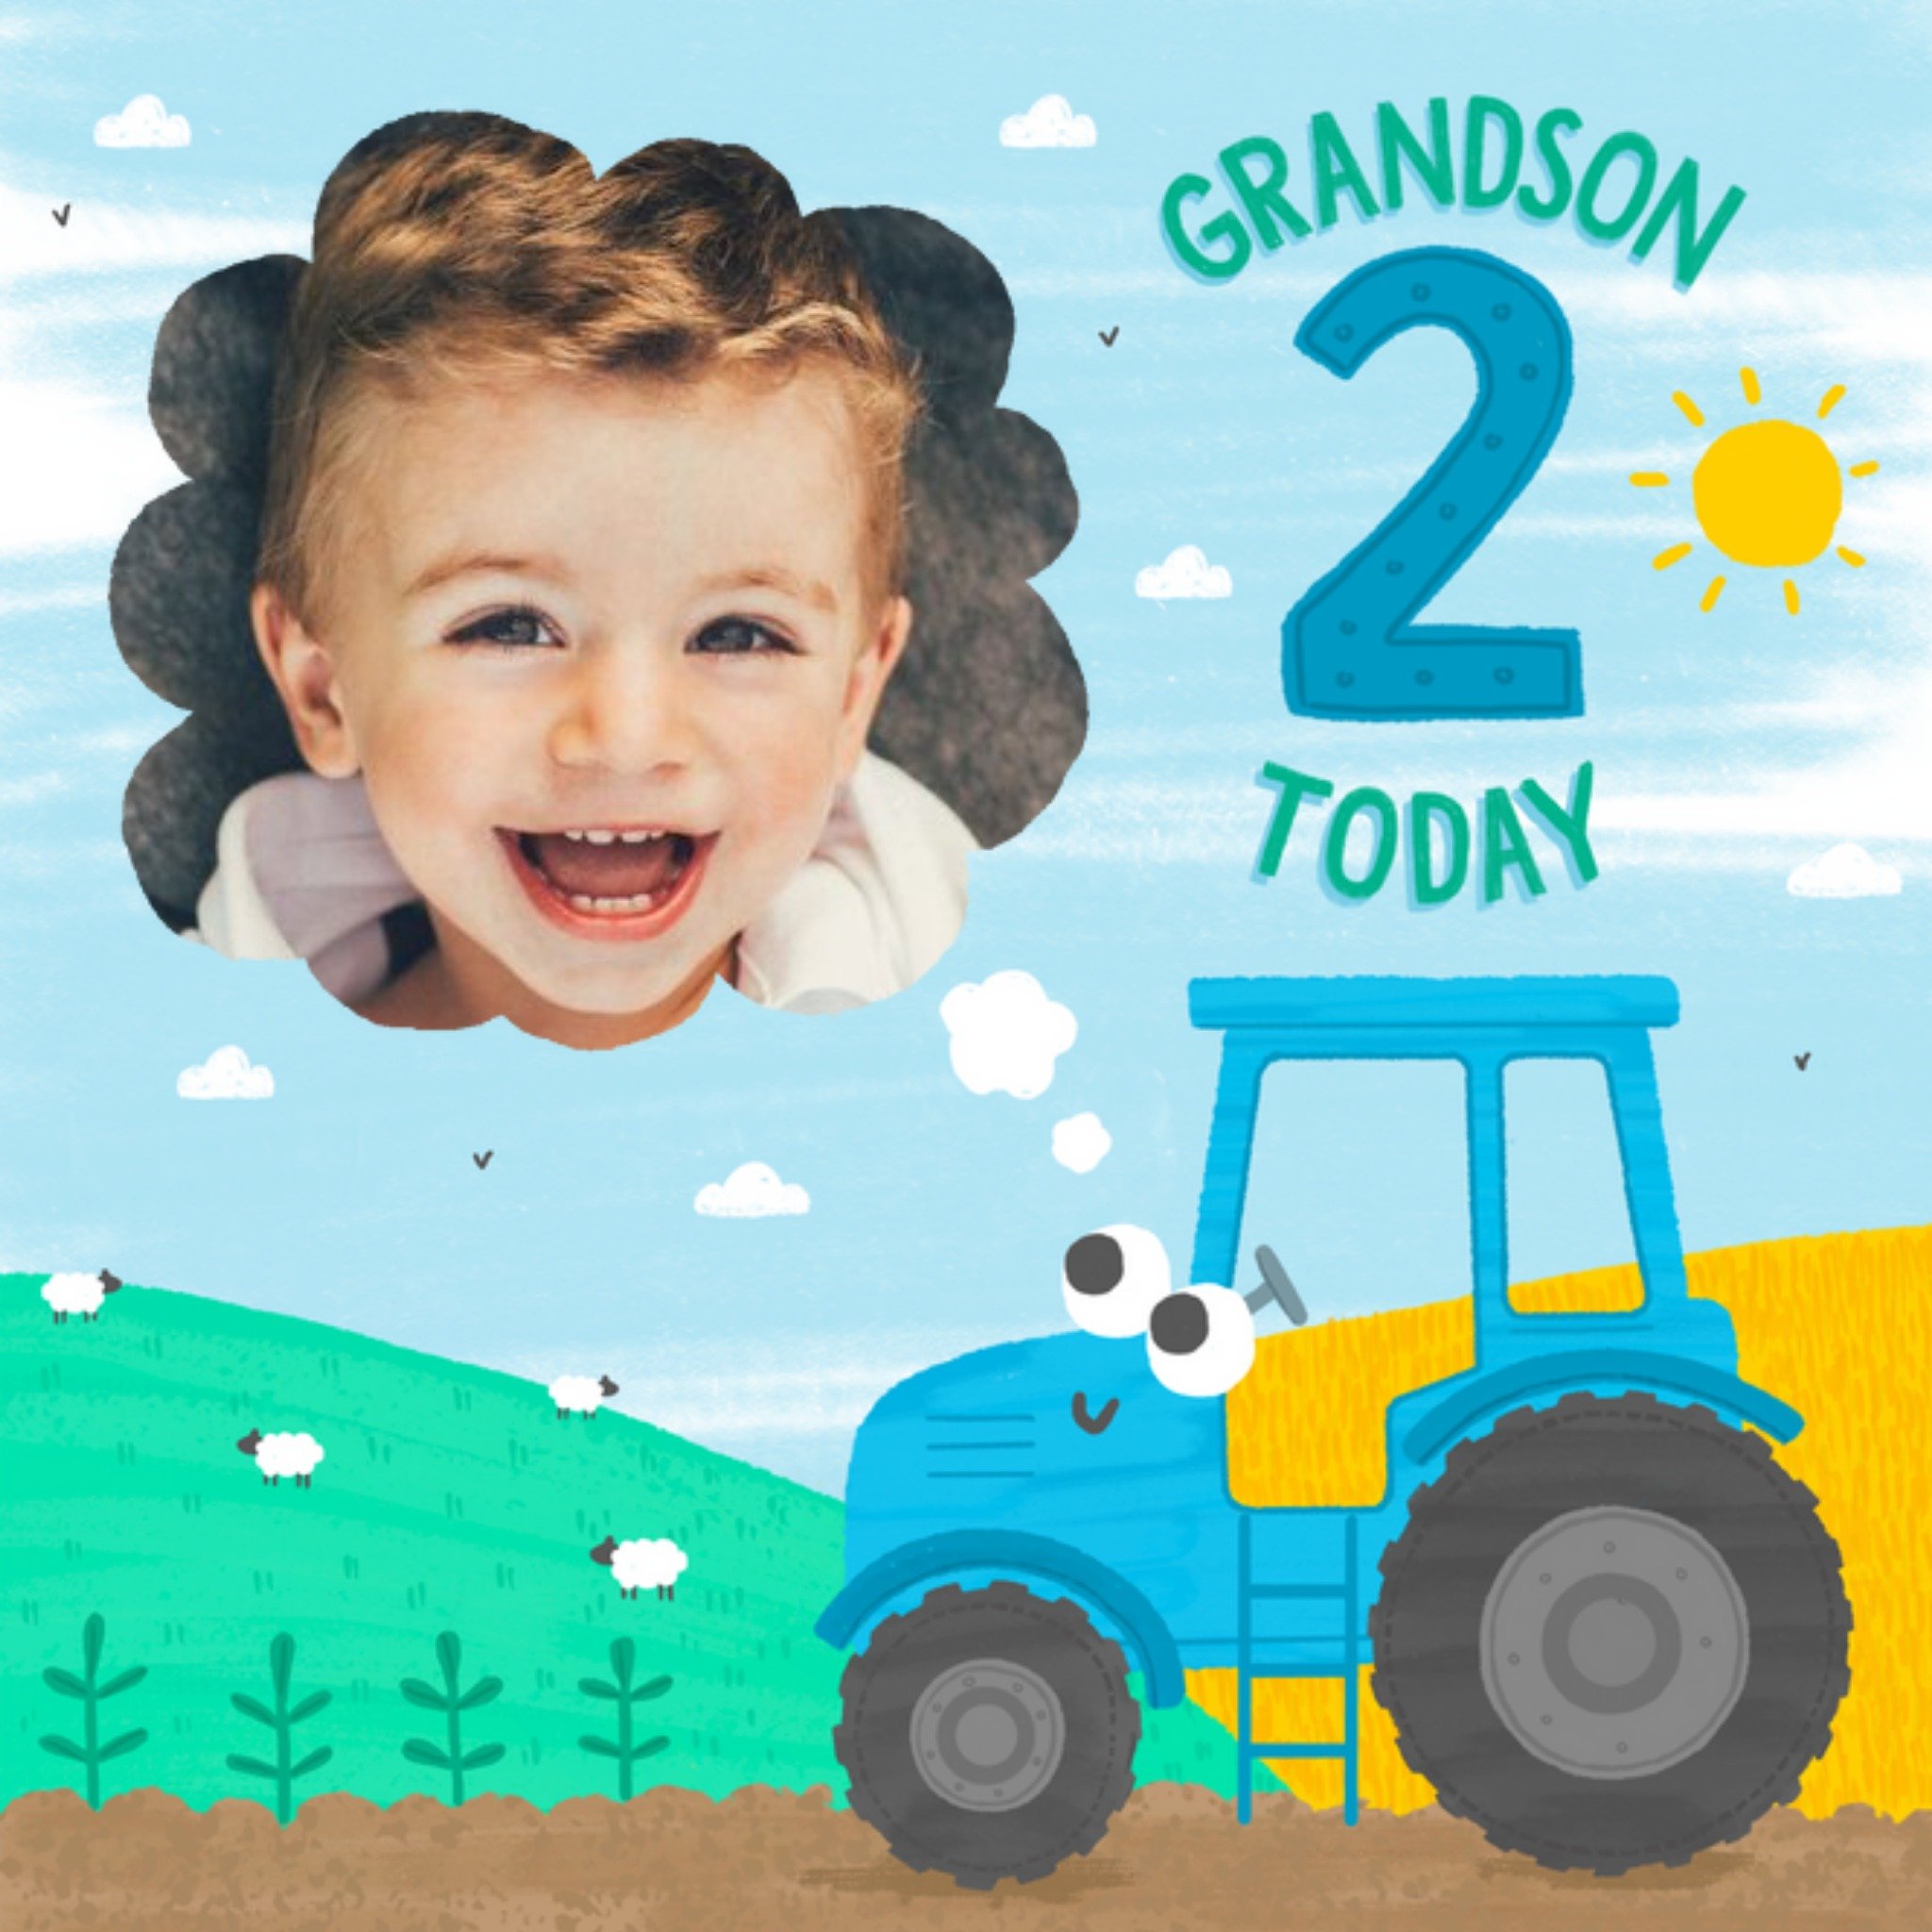 Moonpig Cute Tractor Grandson 2 Today Photo Upload Birthday Card, Square